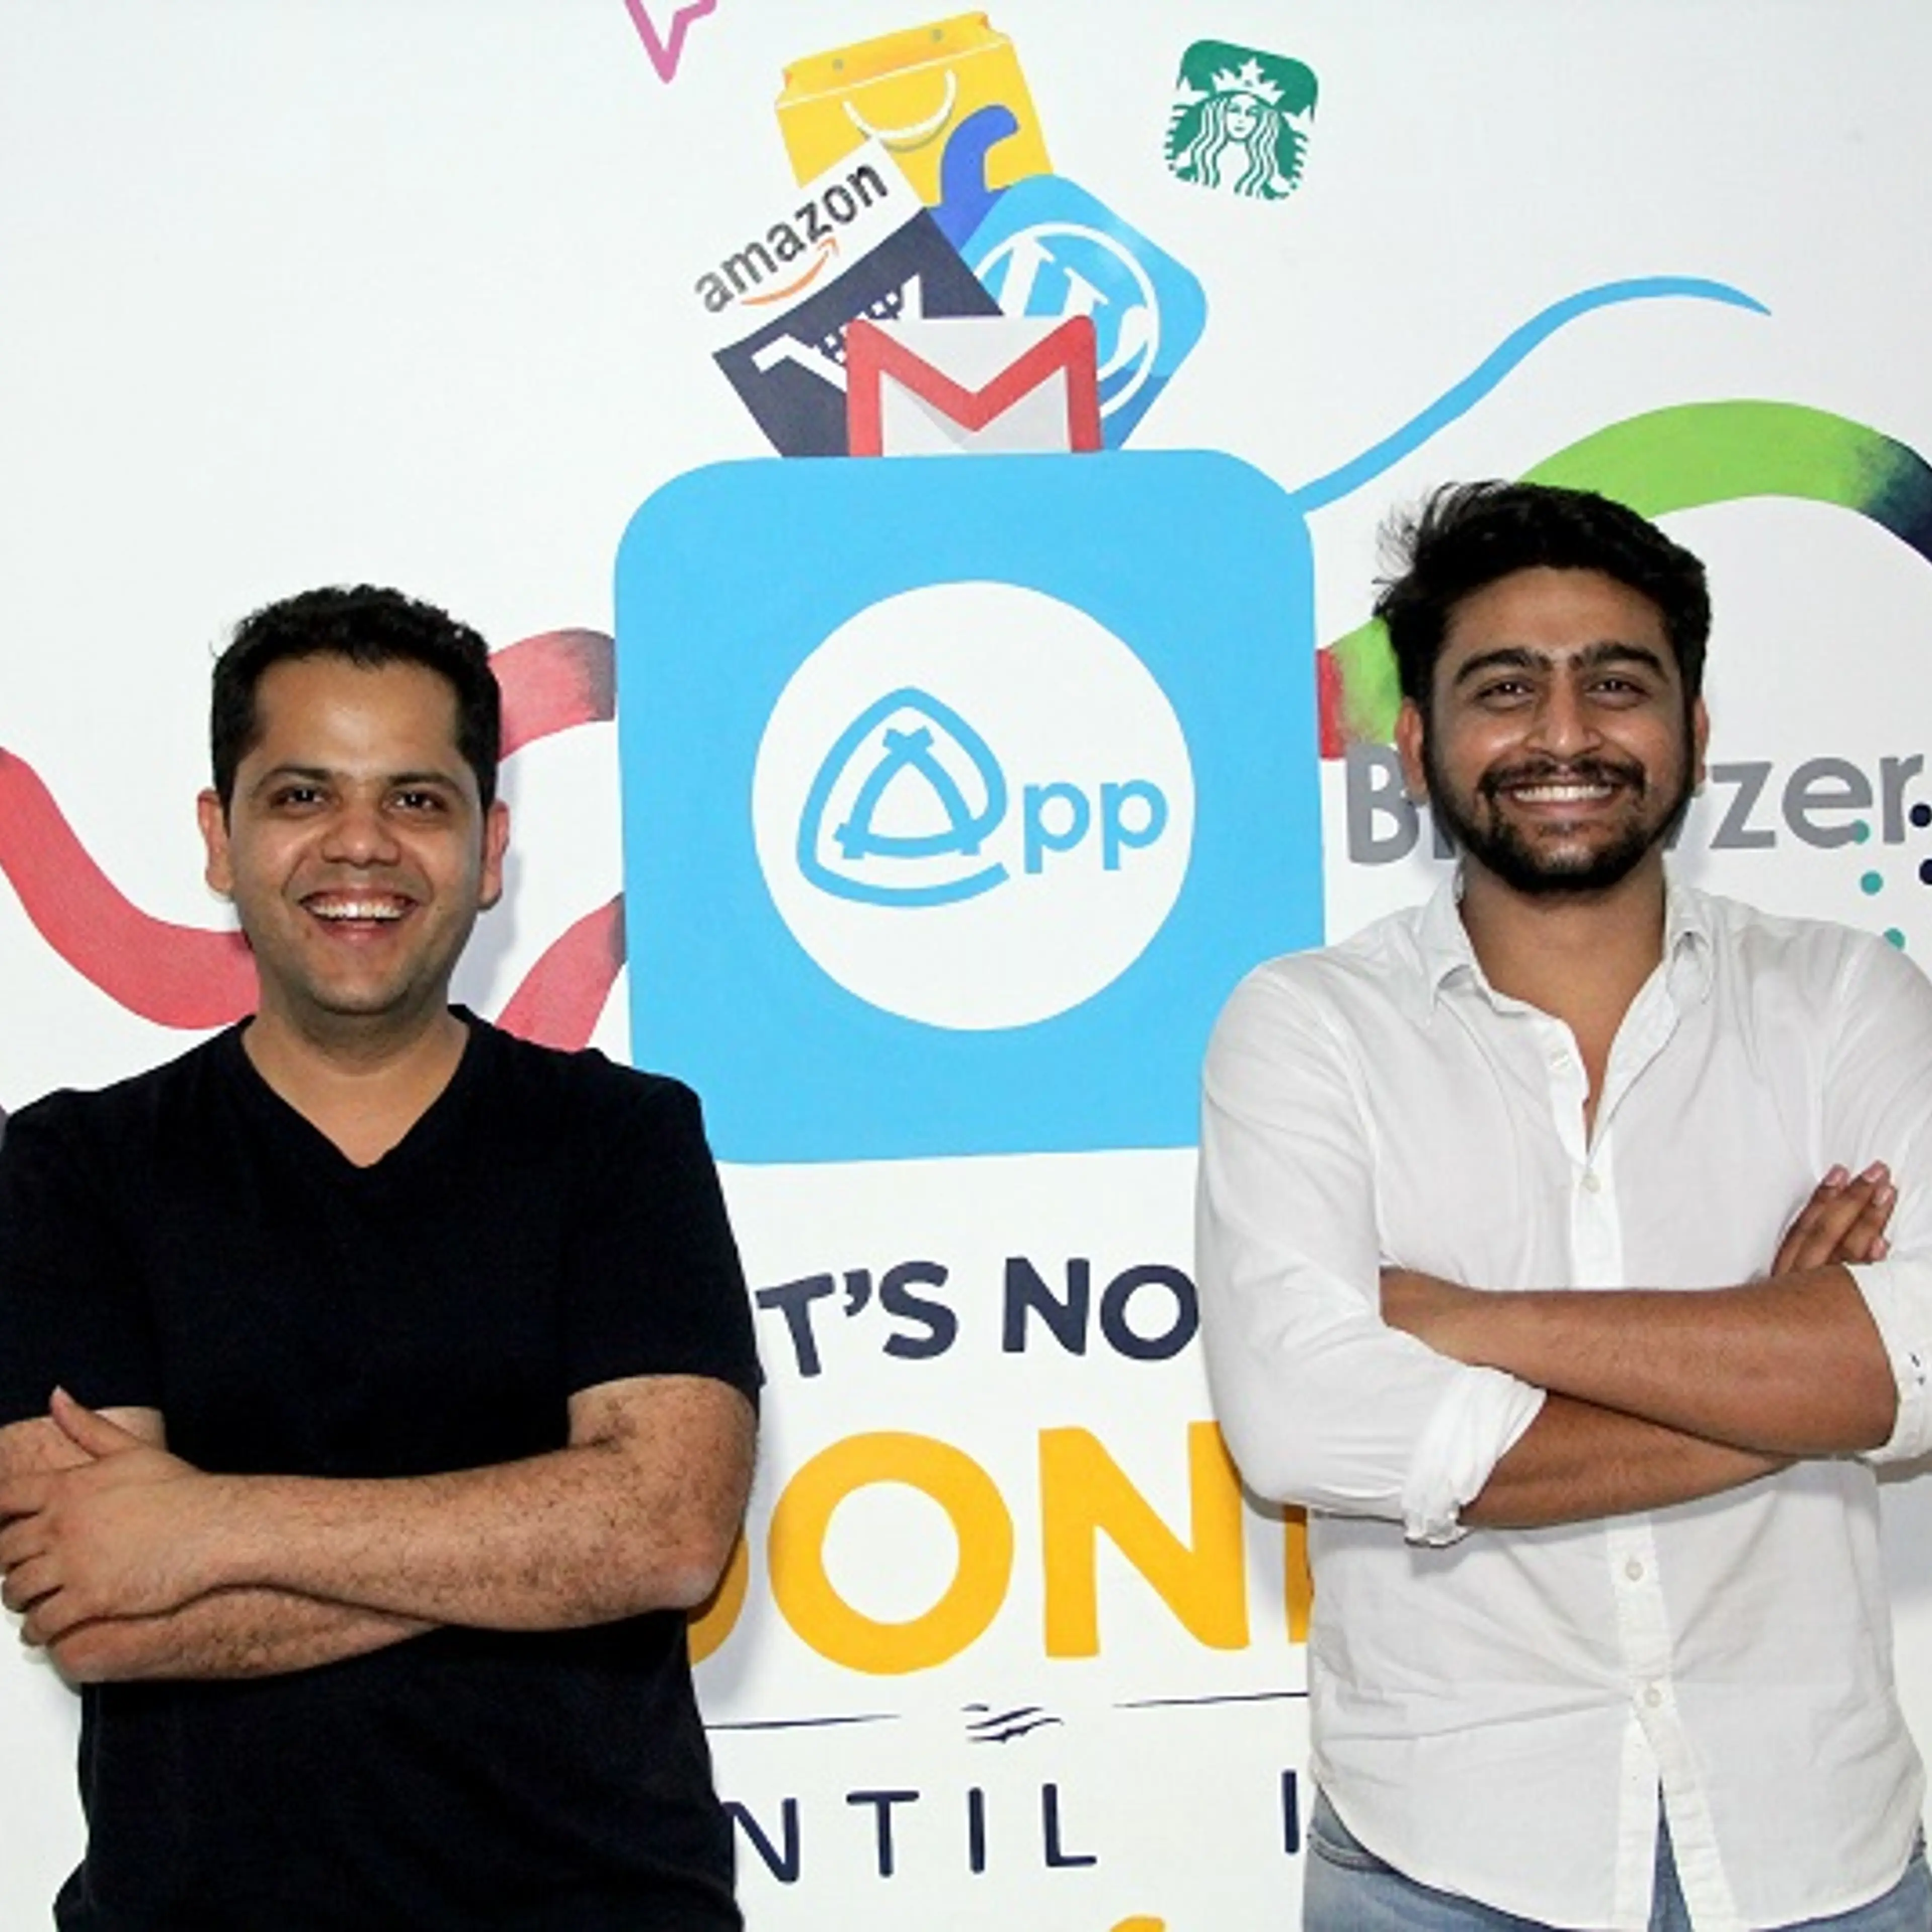 AppBrowzer lets micro entrepreneurs sell their products within 15 minutes of joining it